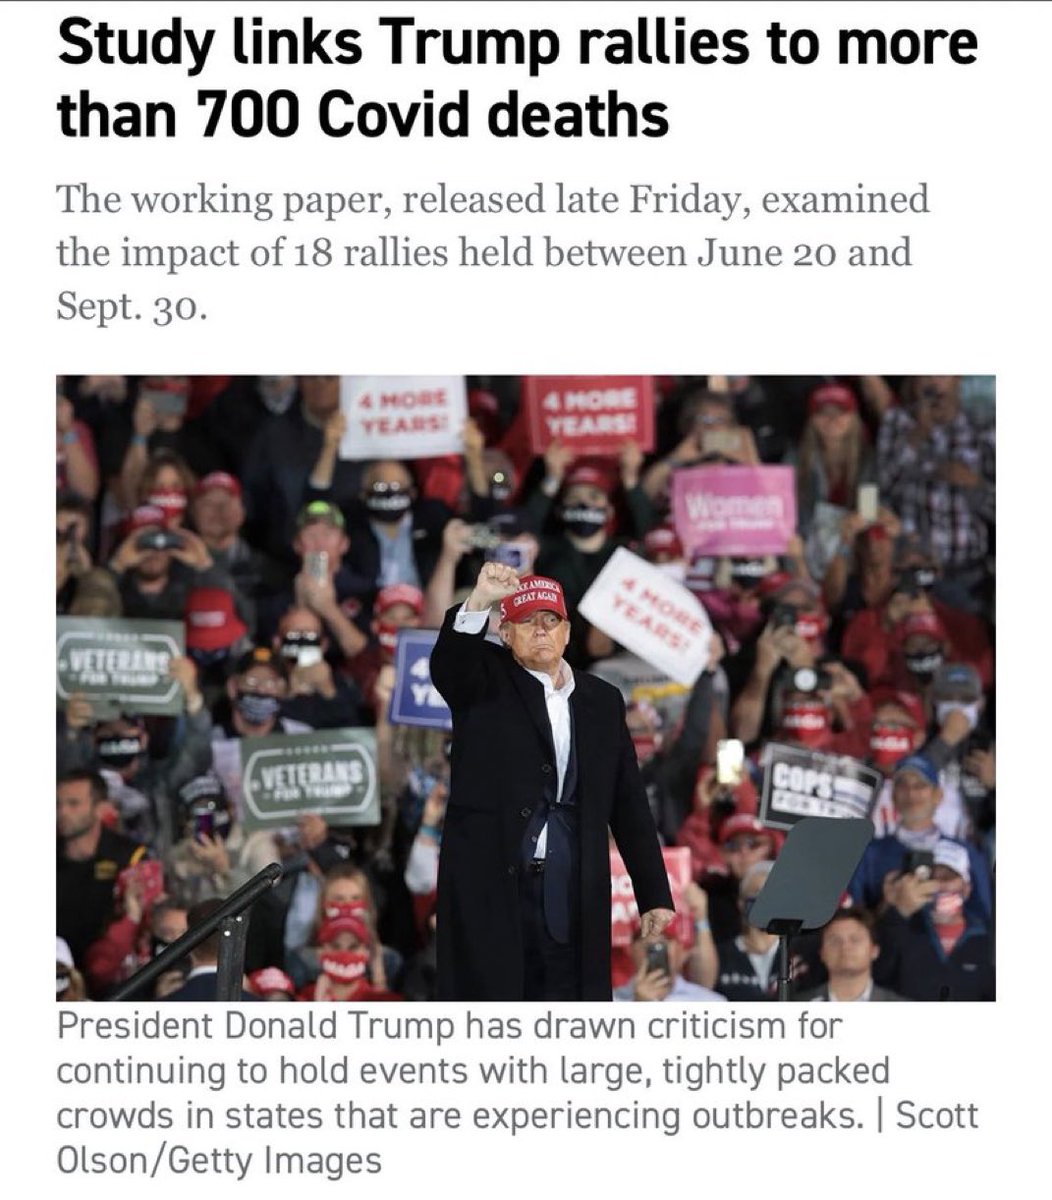 Trump could be one of the largest mass-killers in U.S. history. He knew the virus was deadly, yet he still encouraged people to attend his rallies because he required their adulation.